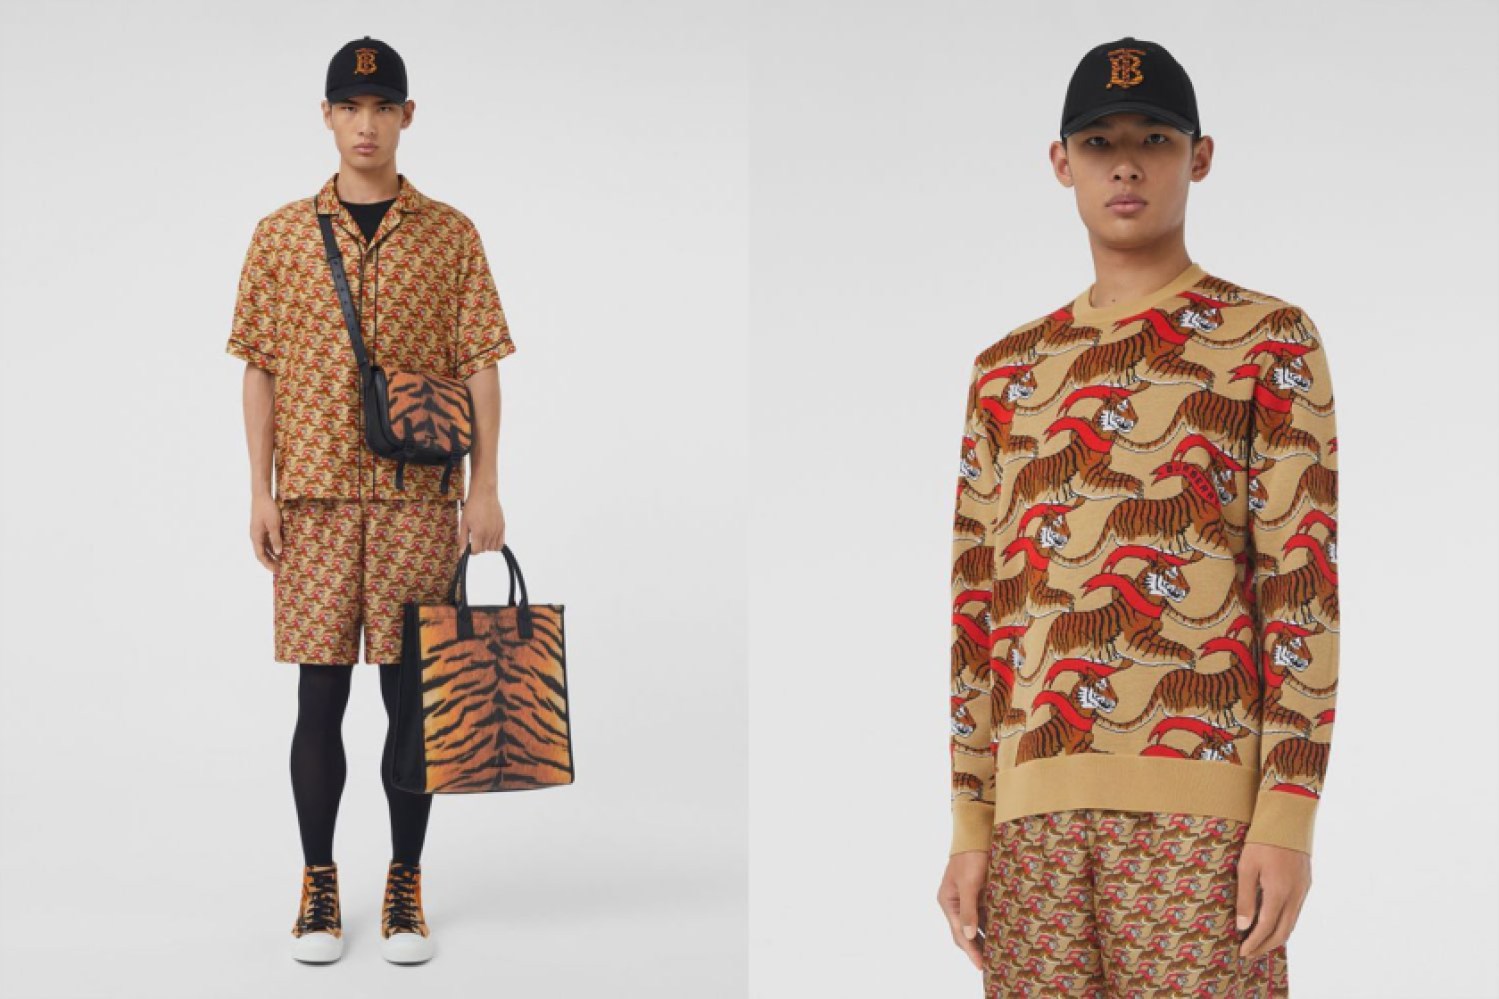 two models, one full-outfit and one close up, in tiger-graphiced, tan outfits from Burberry.